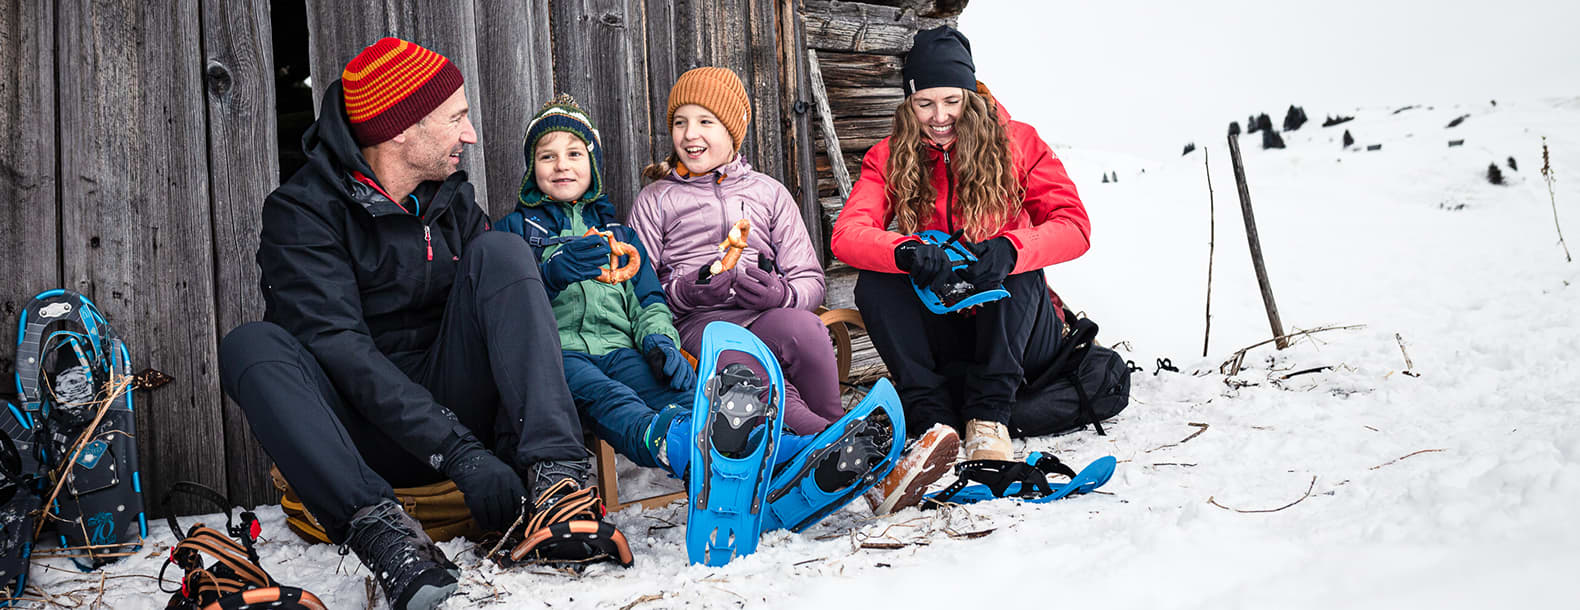 Shop Outdoor Clothing and Footwear Kids online now for